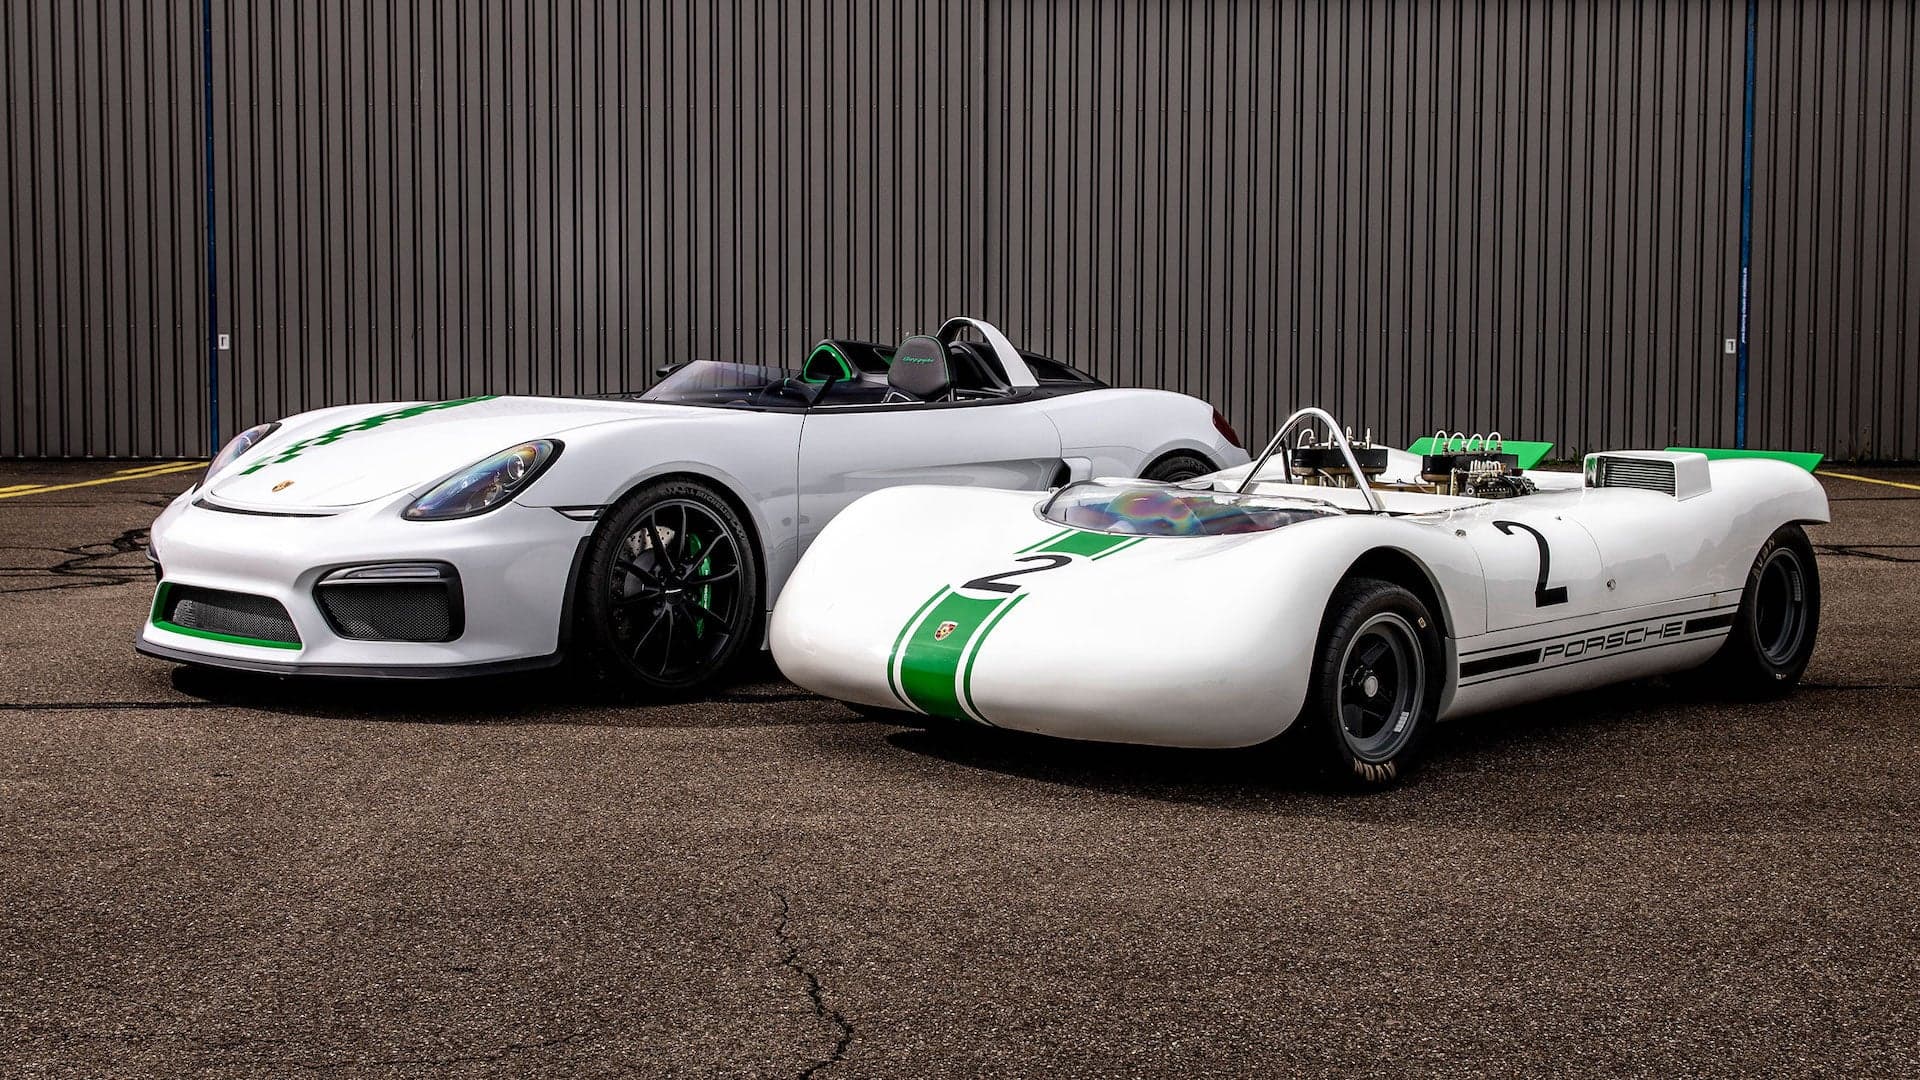 Porsche Boxster Bergspyder Is a Roofless, Single-Seater Concept That Never Made it to Production